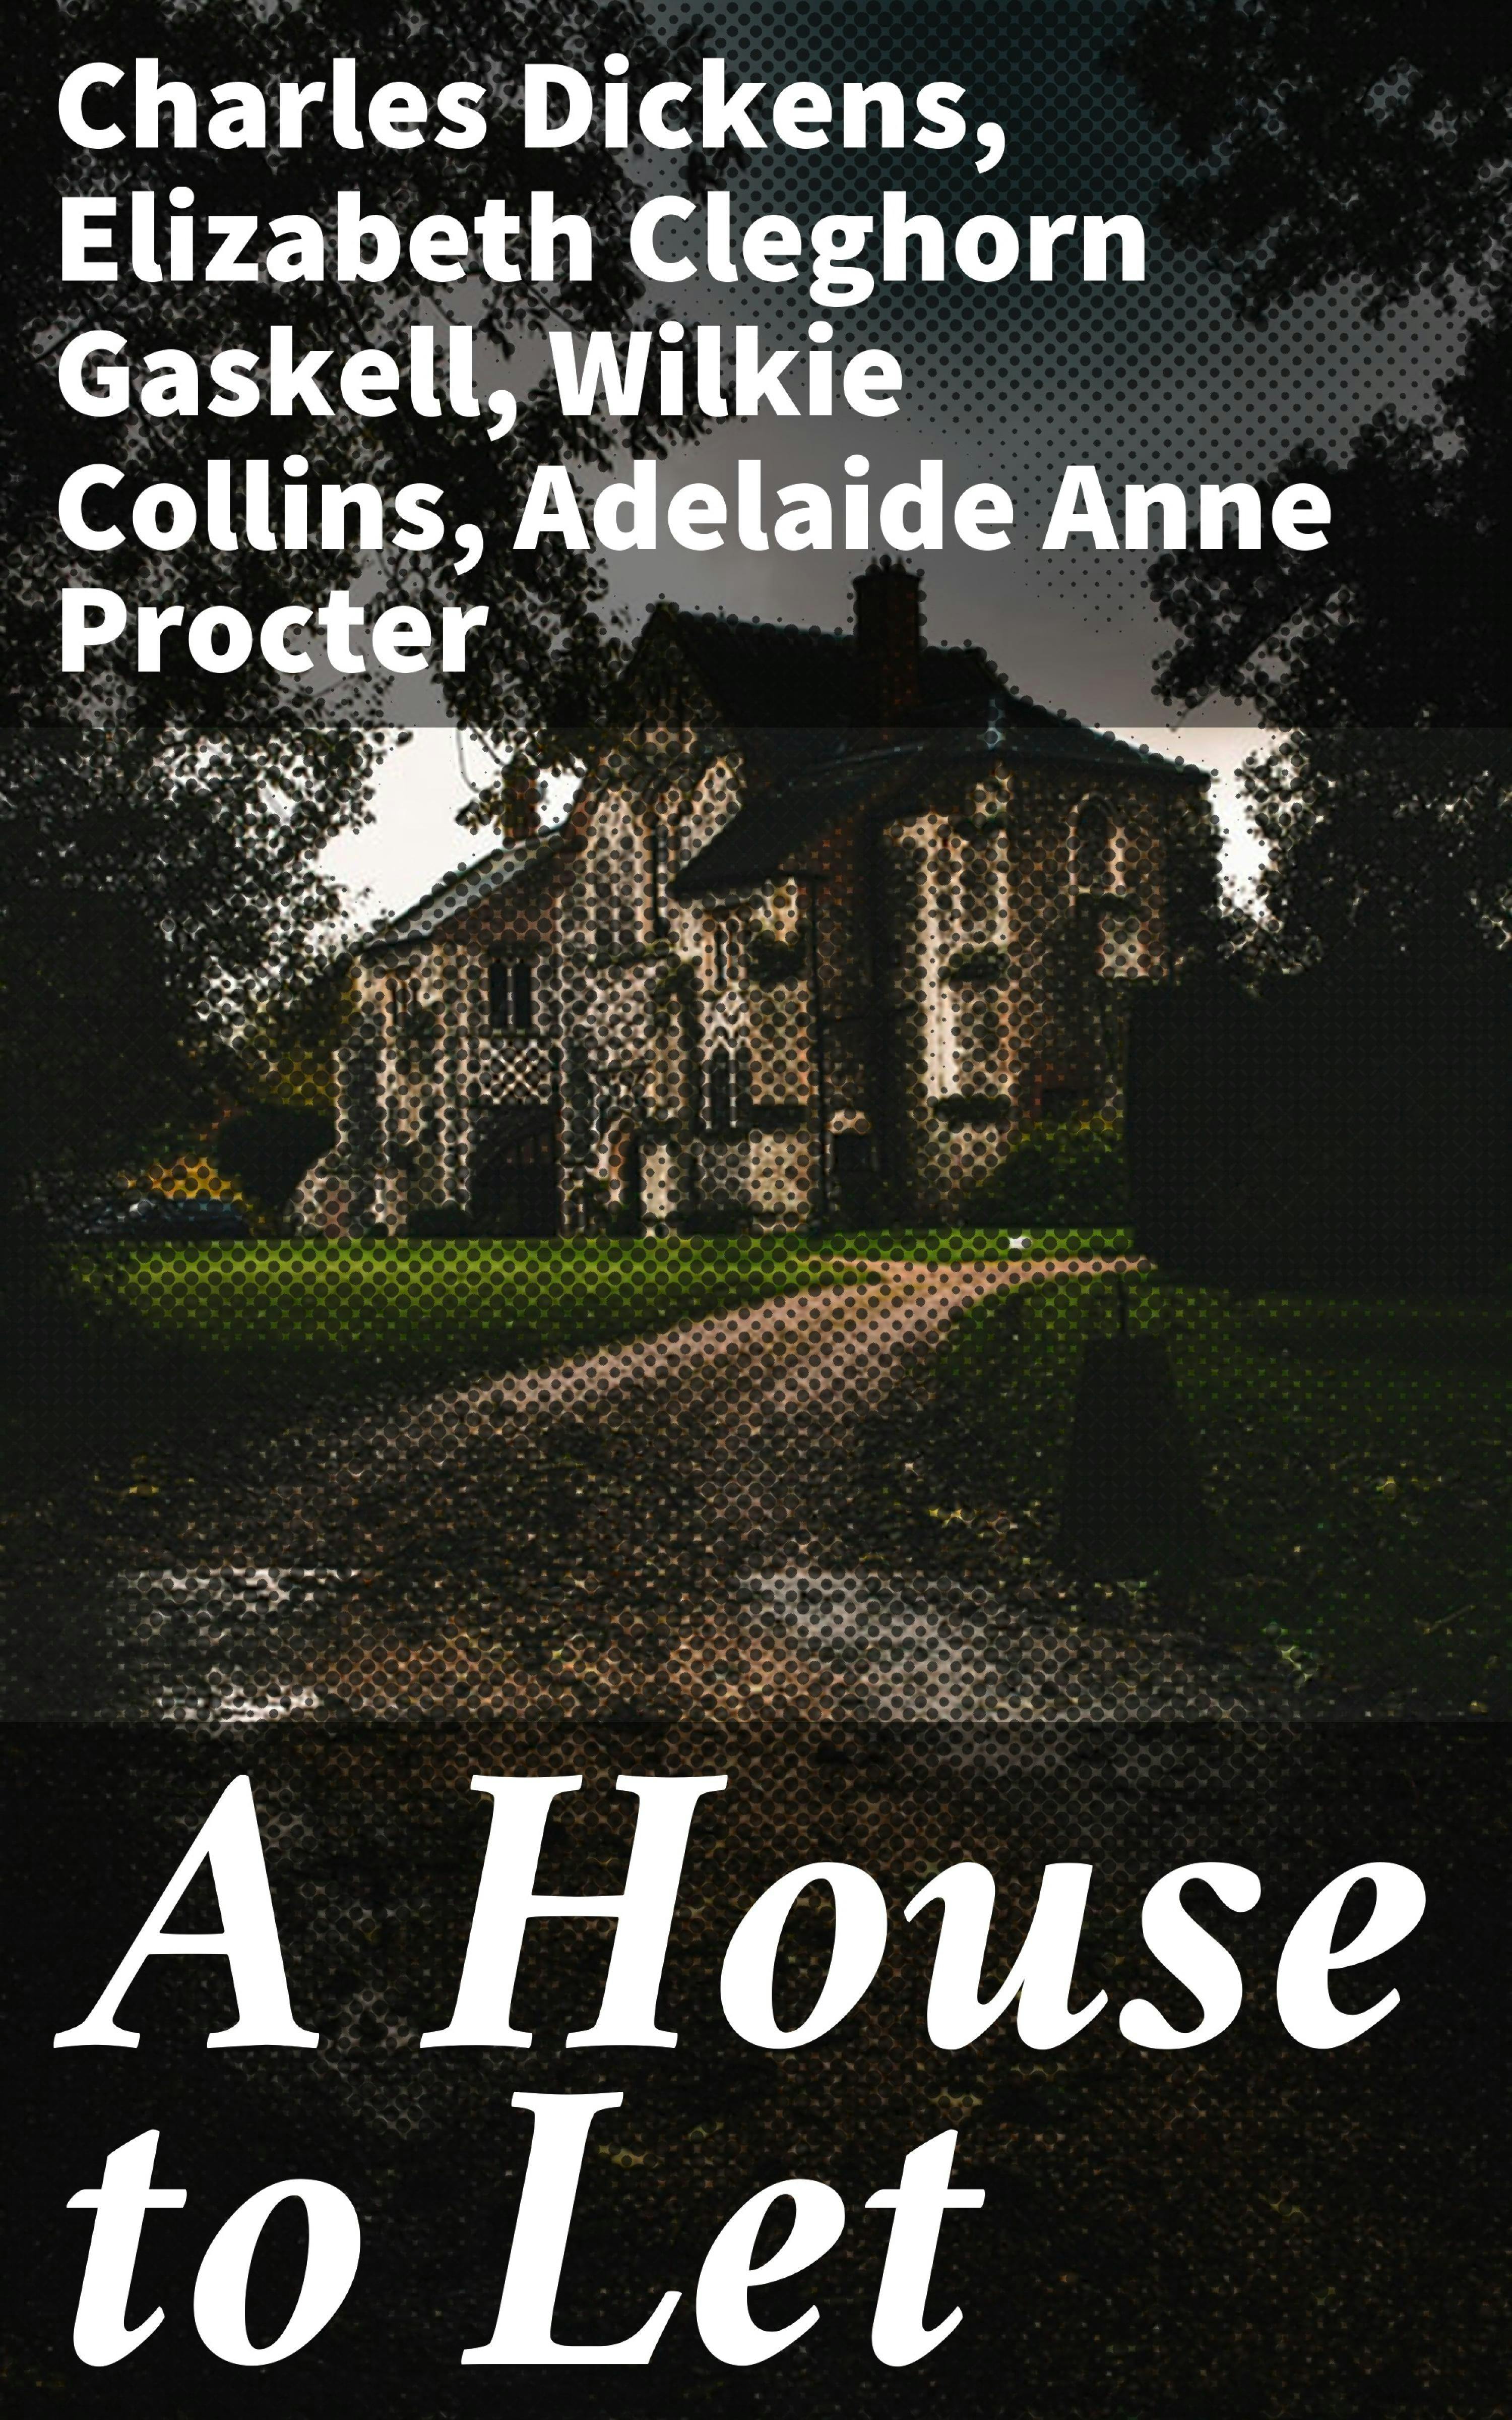 A House to Let - Elizabeth Cleghorn Gaskell, Wilkie Collins, Charles Dickens, Adelaide Anne Procter